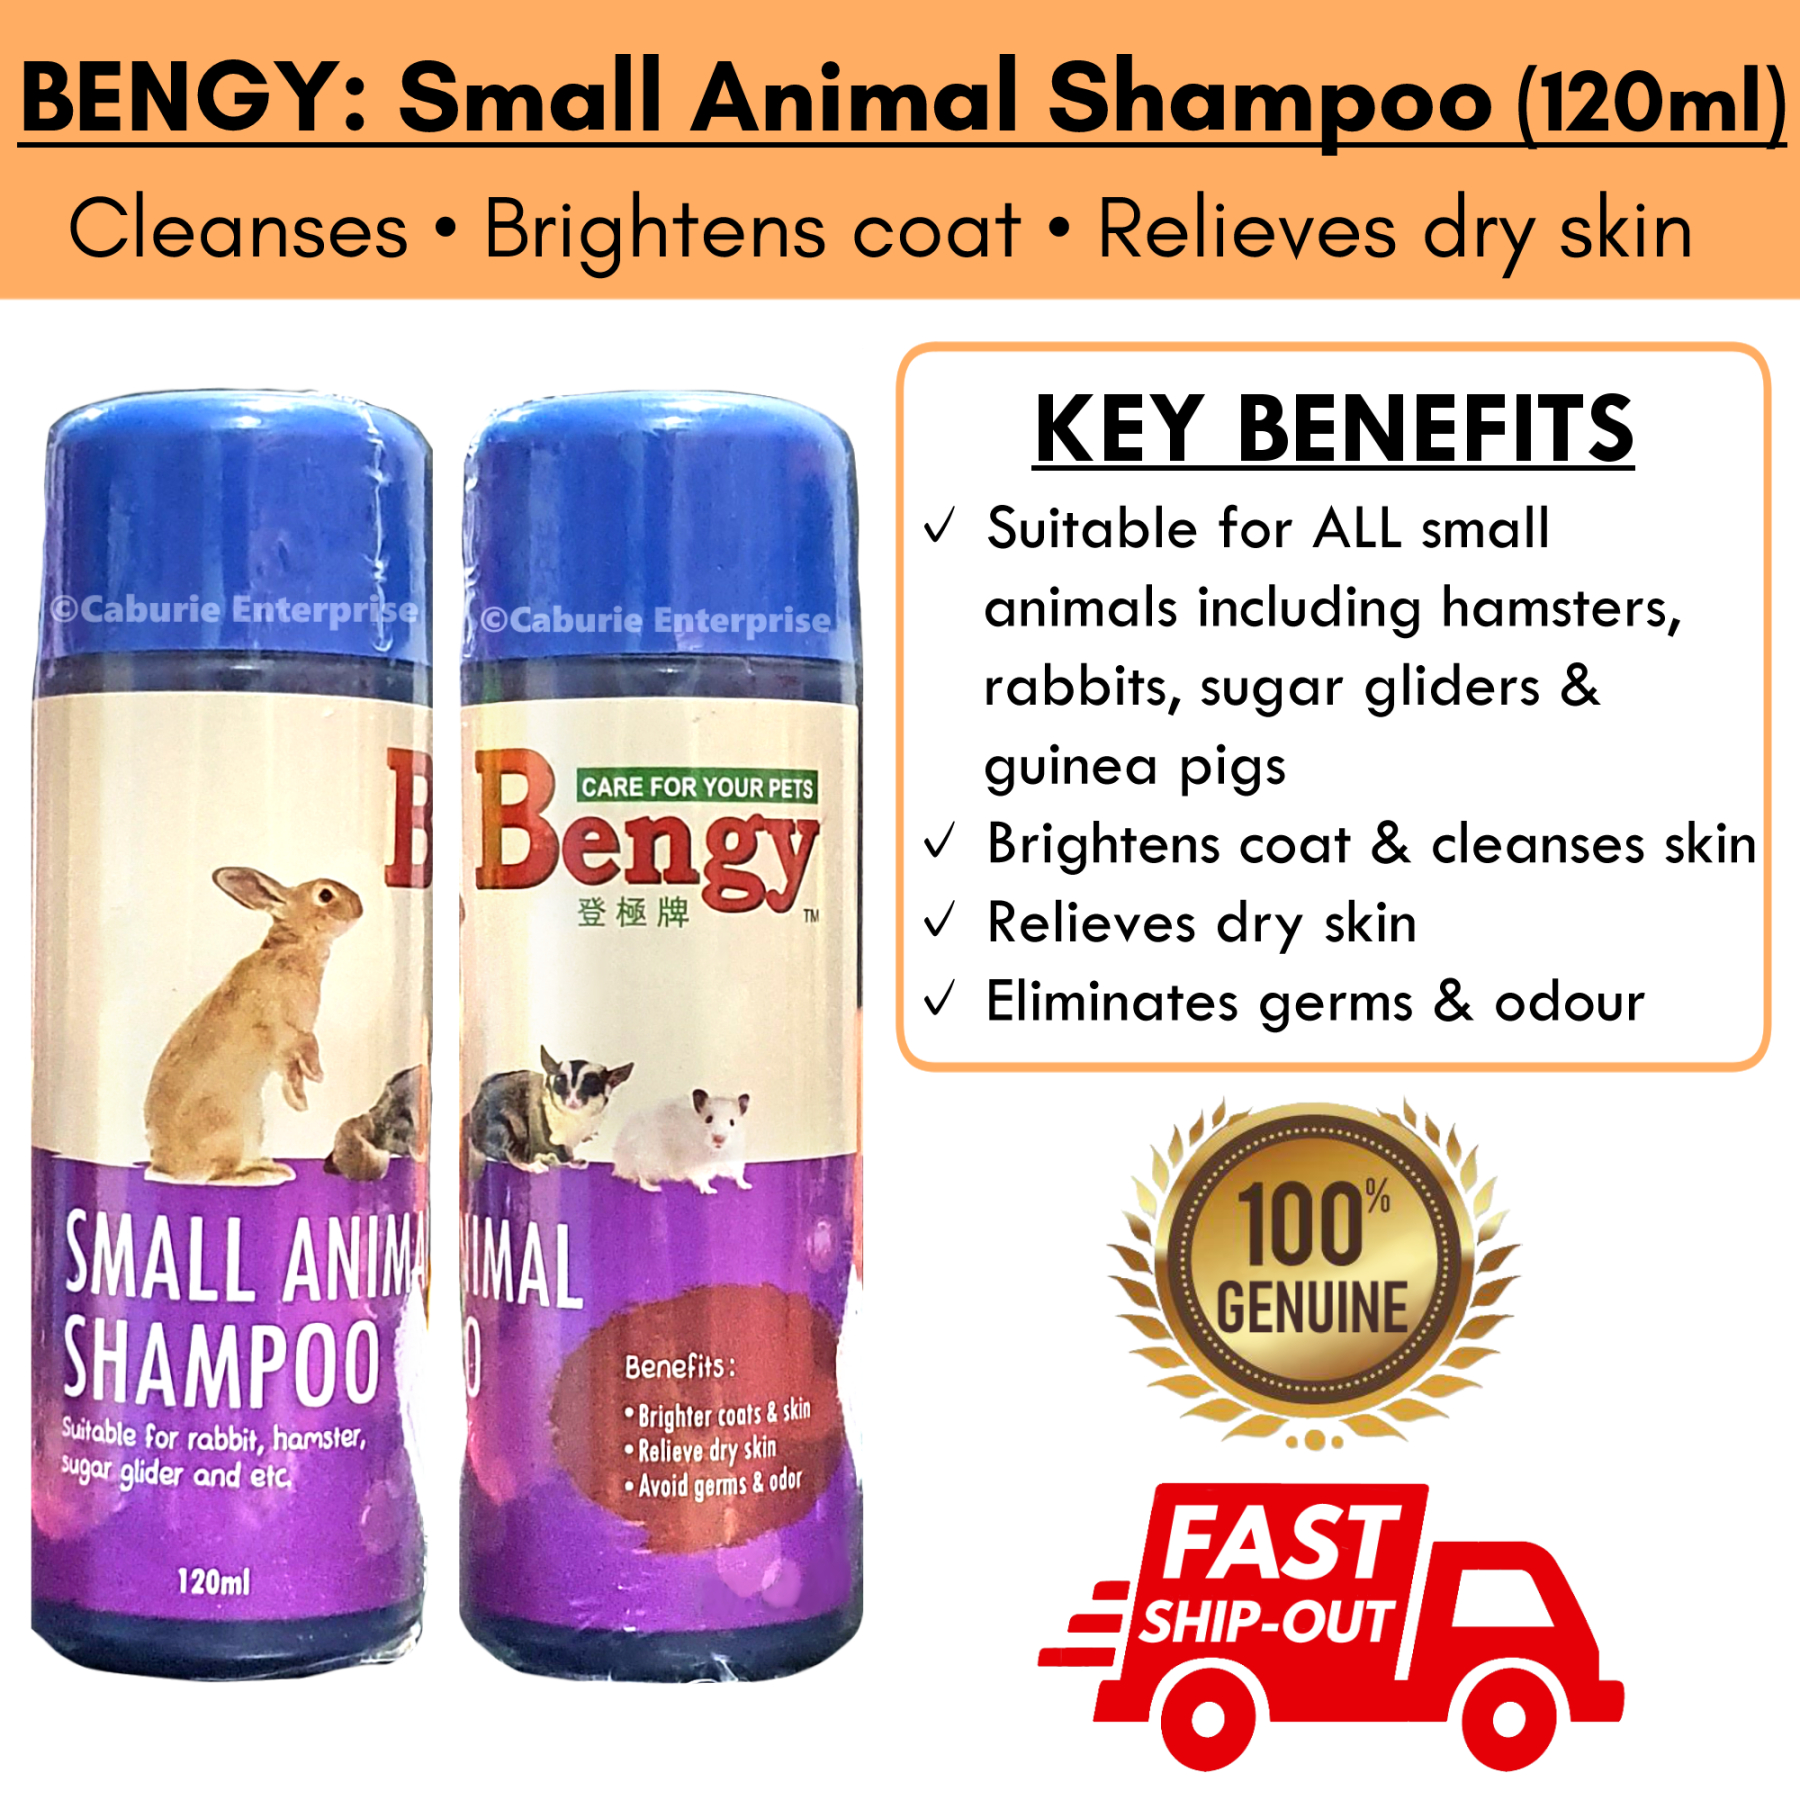 BENGY: Small Animal Shampoo (120ml) - Suitable for ALL small animals  including hamsters, rabbits, sugar gliders & guinea pigs. Cleanses &  brightens coat + skin. Relieves dry skin. Eliminates germs, bacteria &